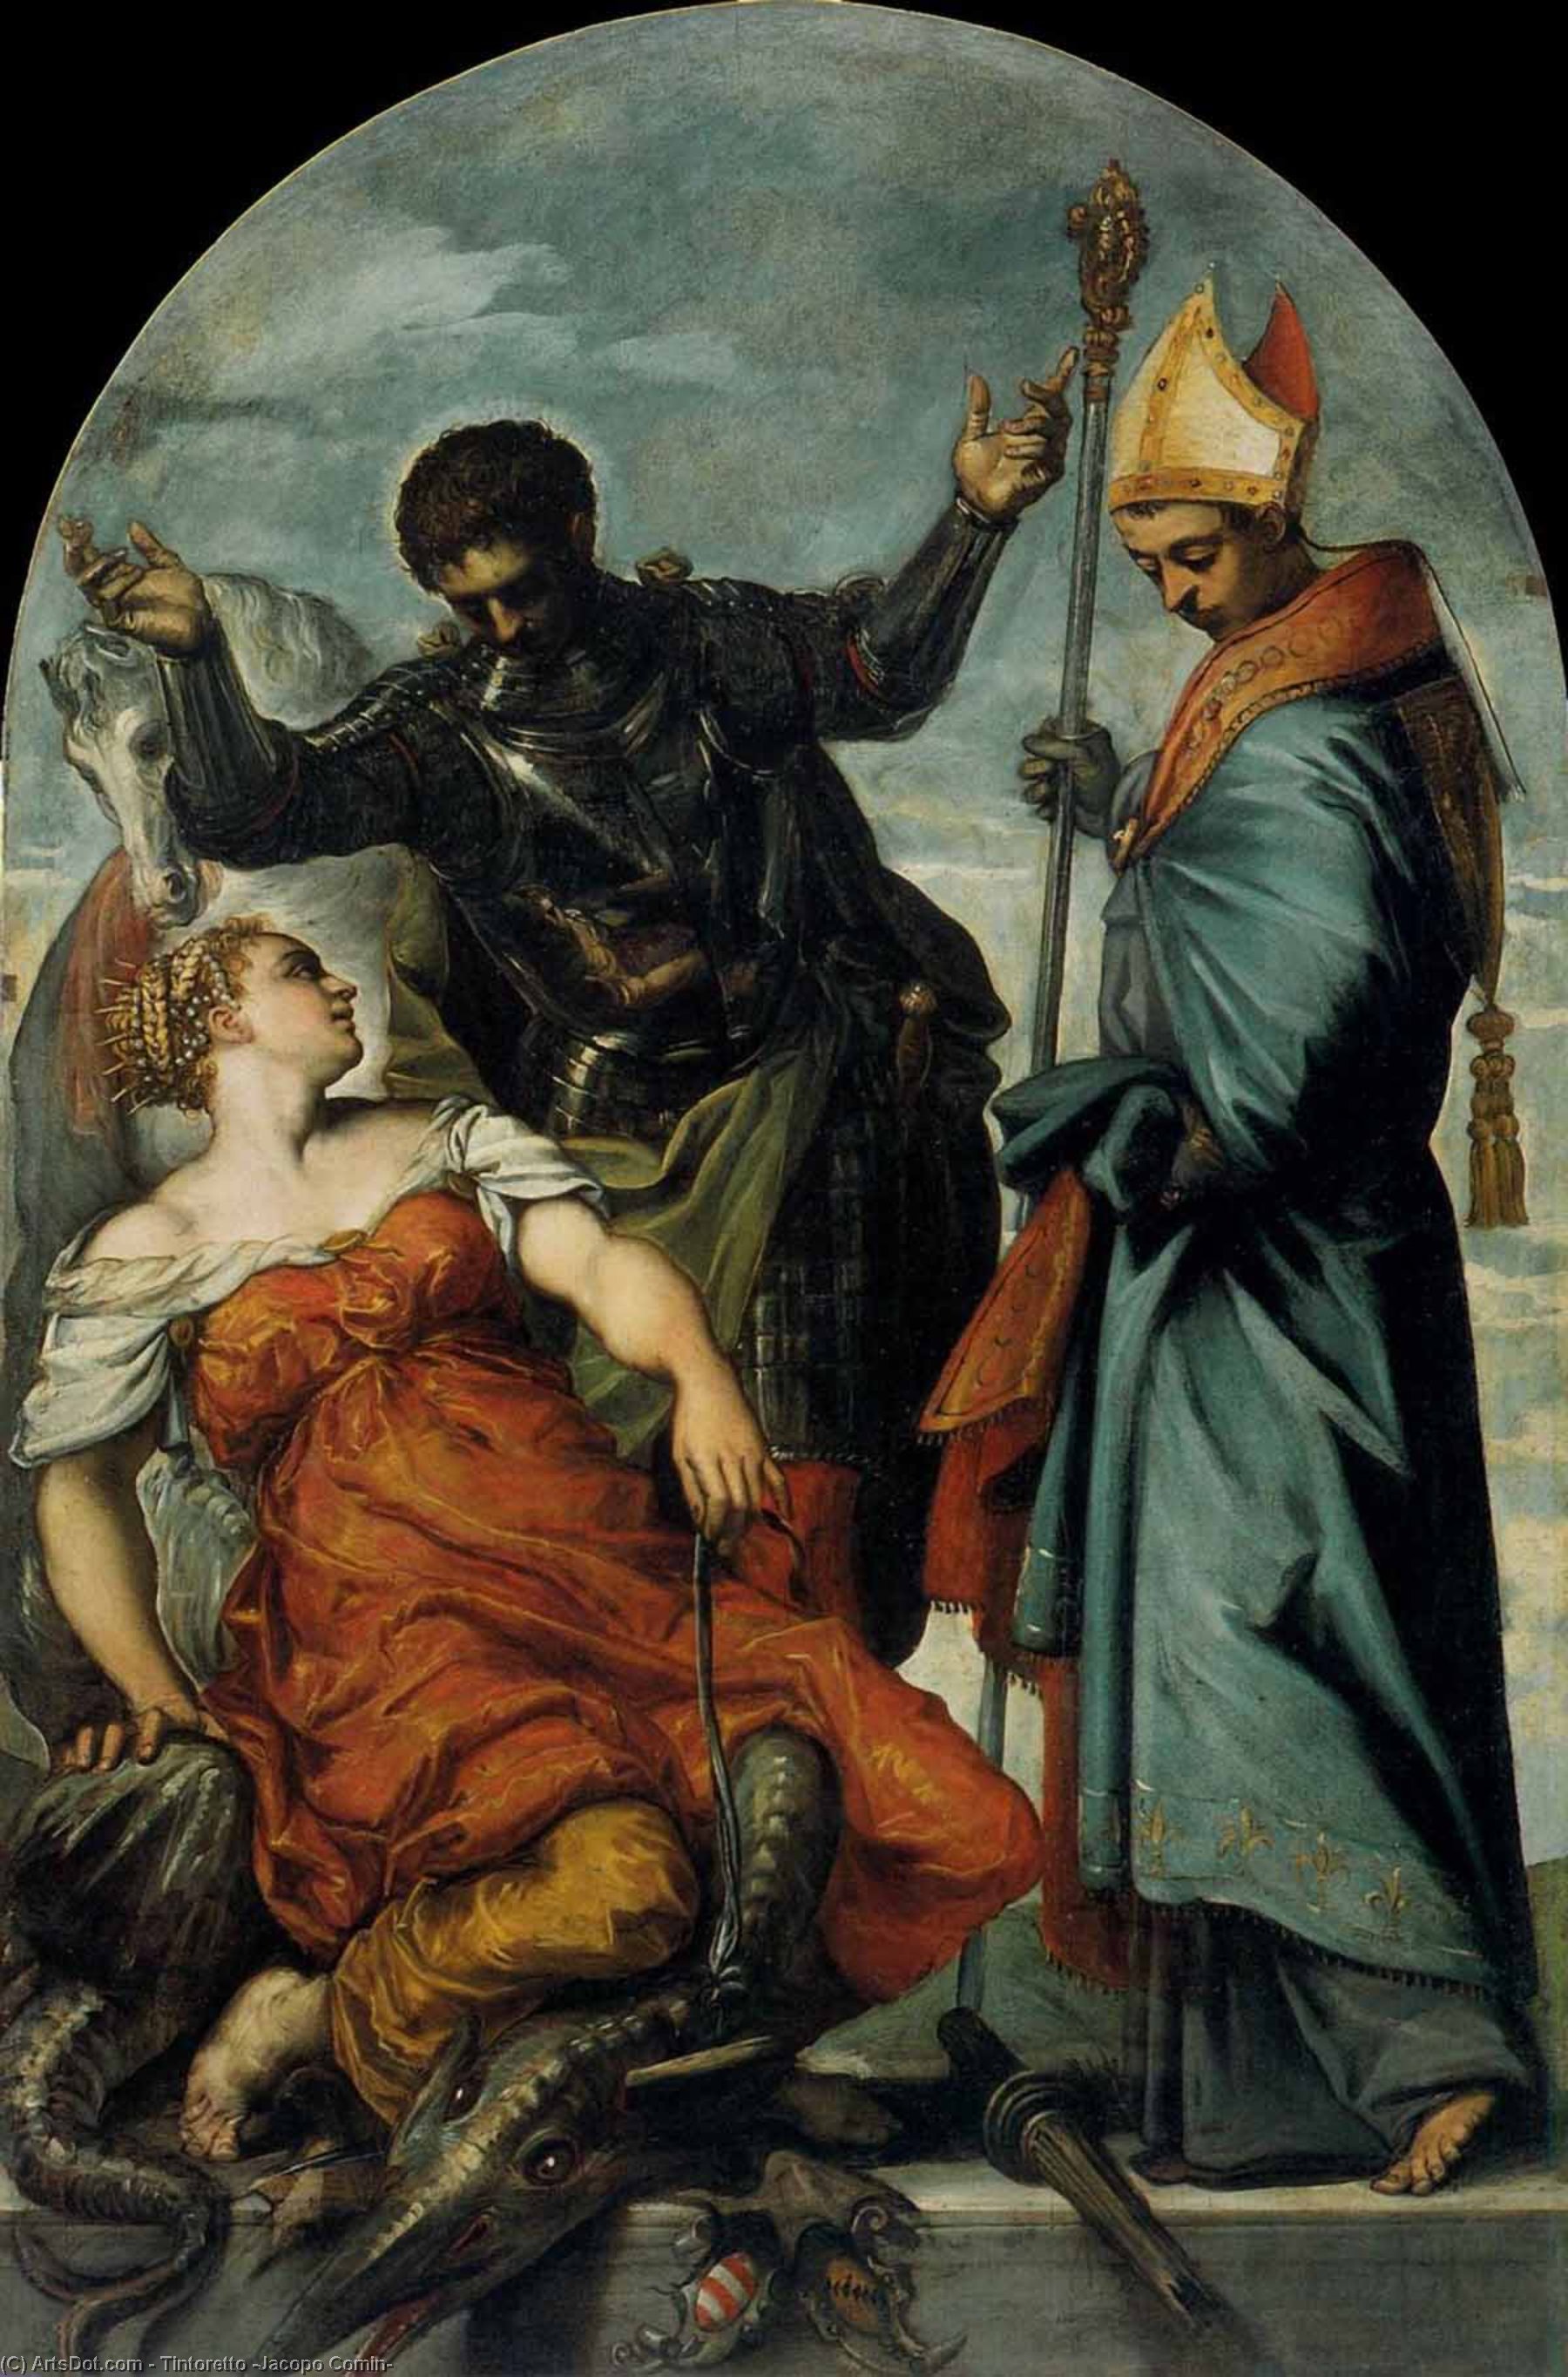 Order Paintings Reproductions St Louis, St George, and the Princess, 1553 by Tintoretto (Jacopo Comin) (1518-1594, Italy) | ArtsDot.com